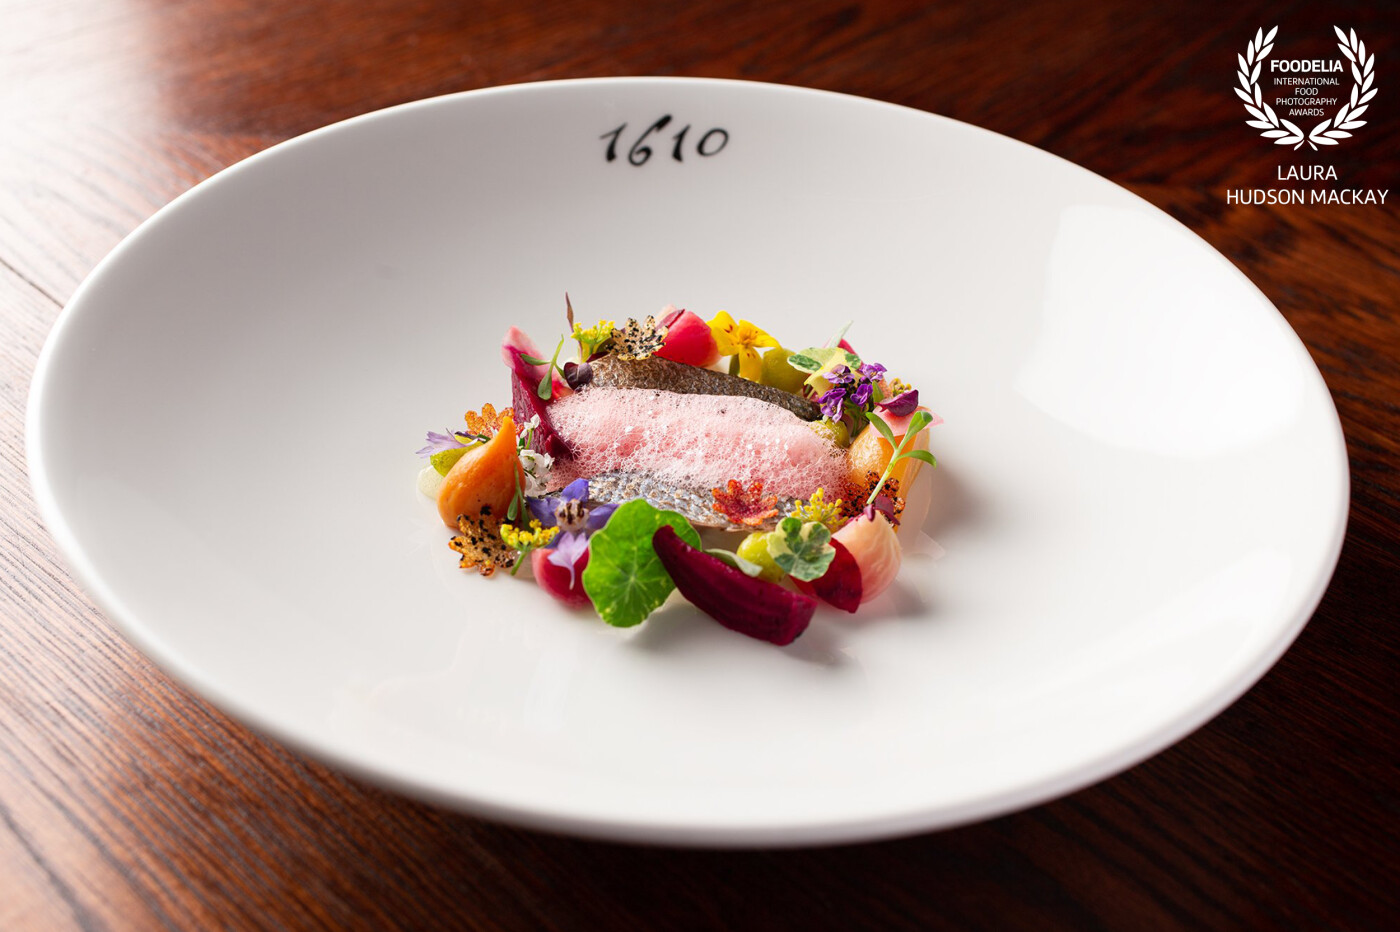 Seabass Mi-cuit, beetroot and citrus<br />
<br />
Presented by the talented Chef team at The Globe Inn, Dumfries, Scotland.